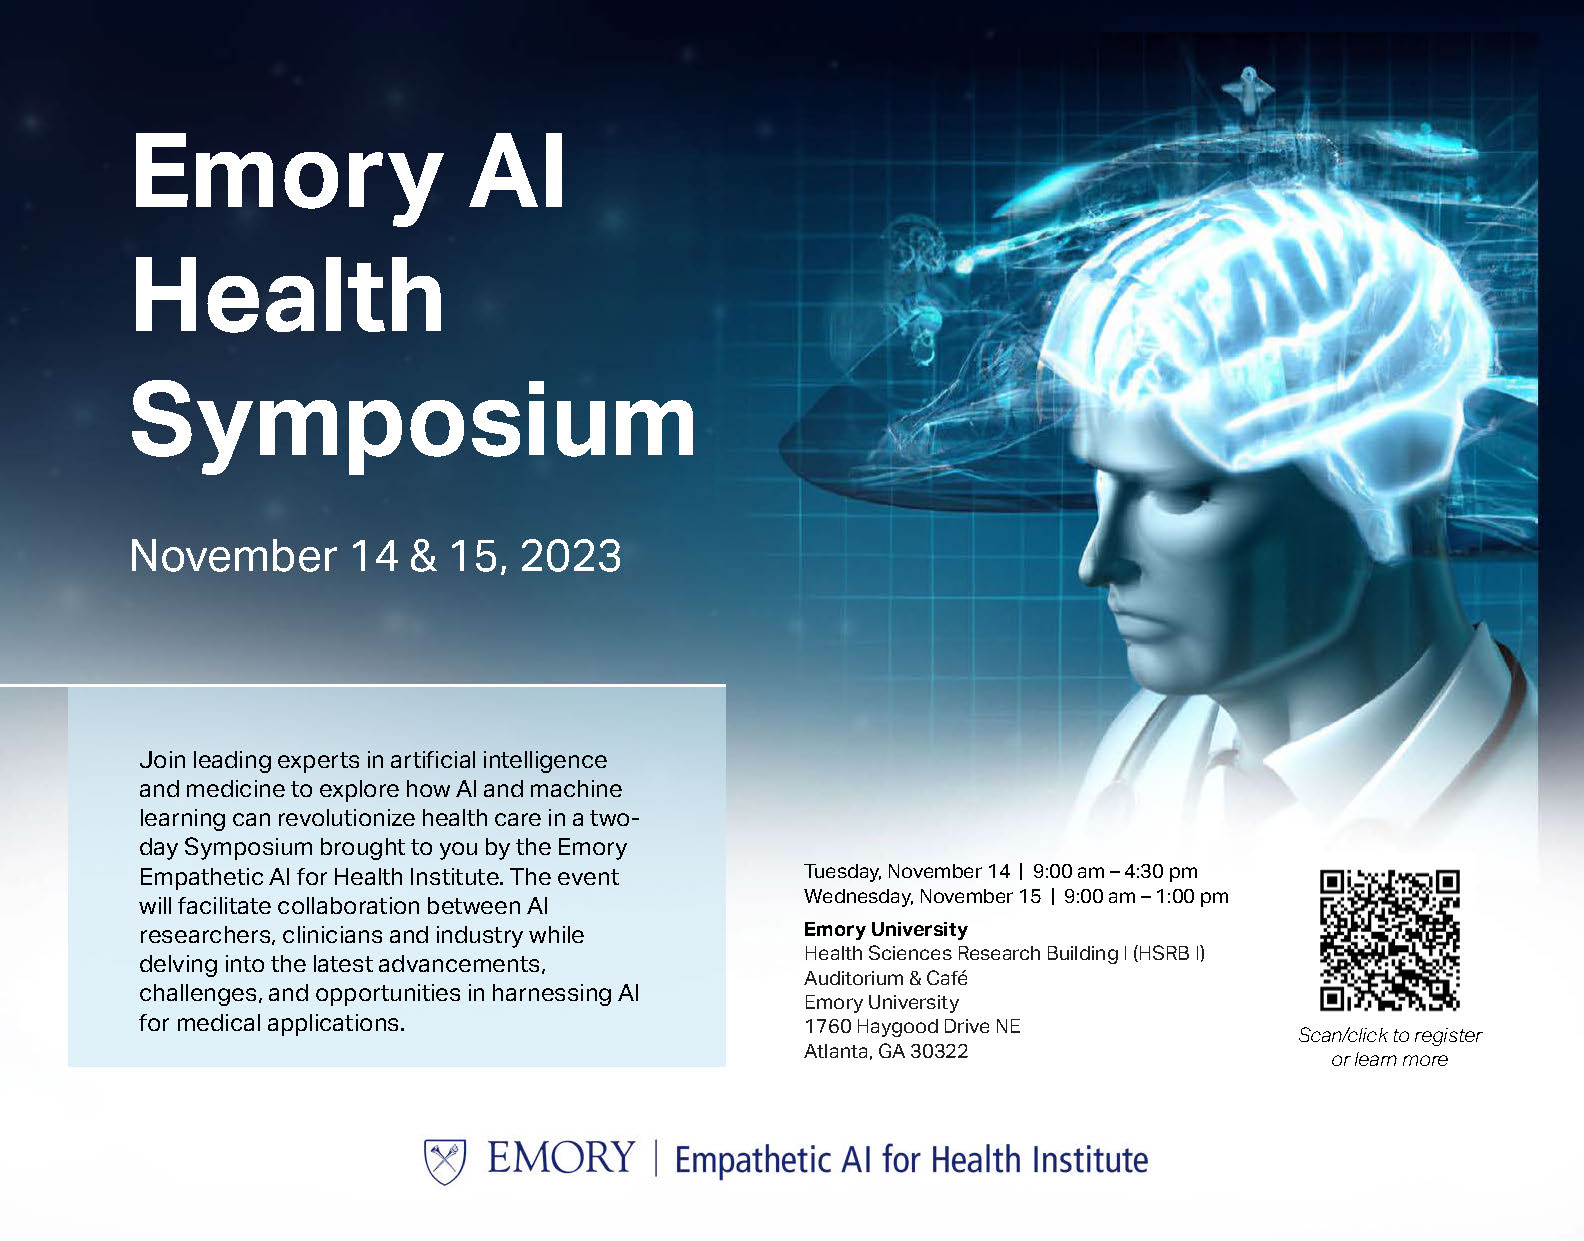 Flyer for Emory AI Health Symposium November 14 and 15 with picture of head and brain